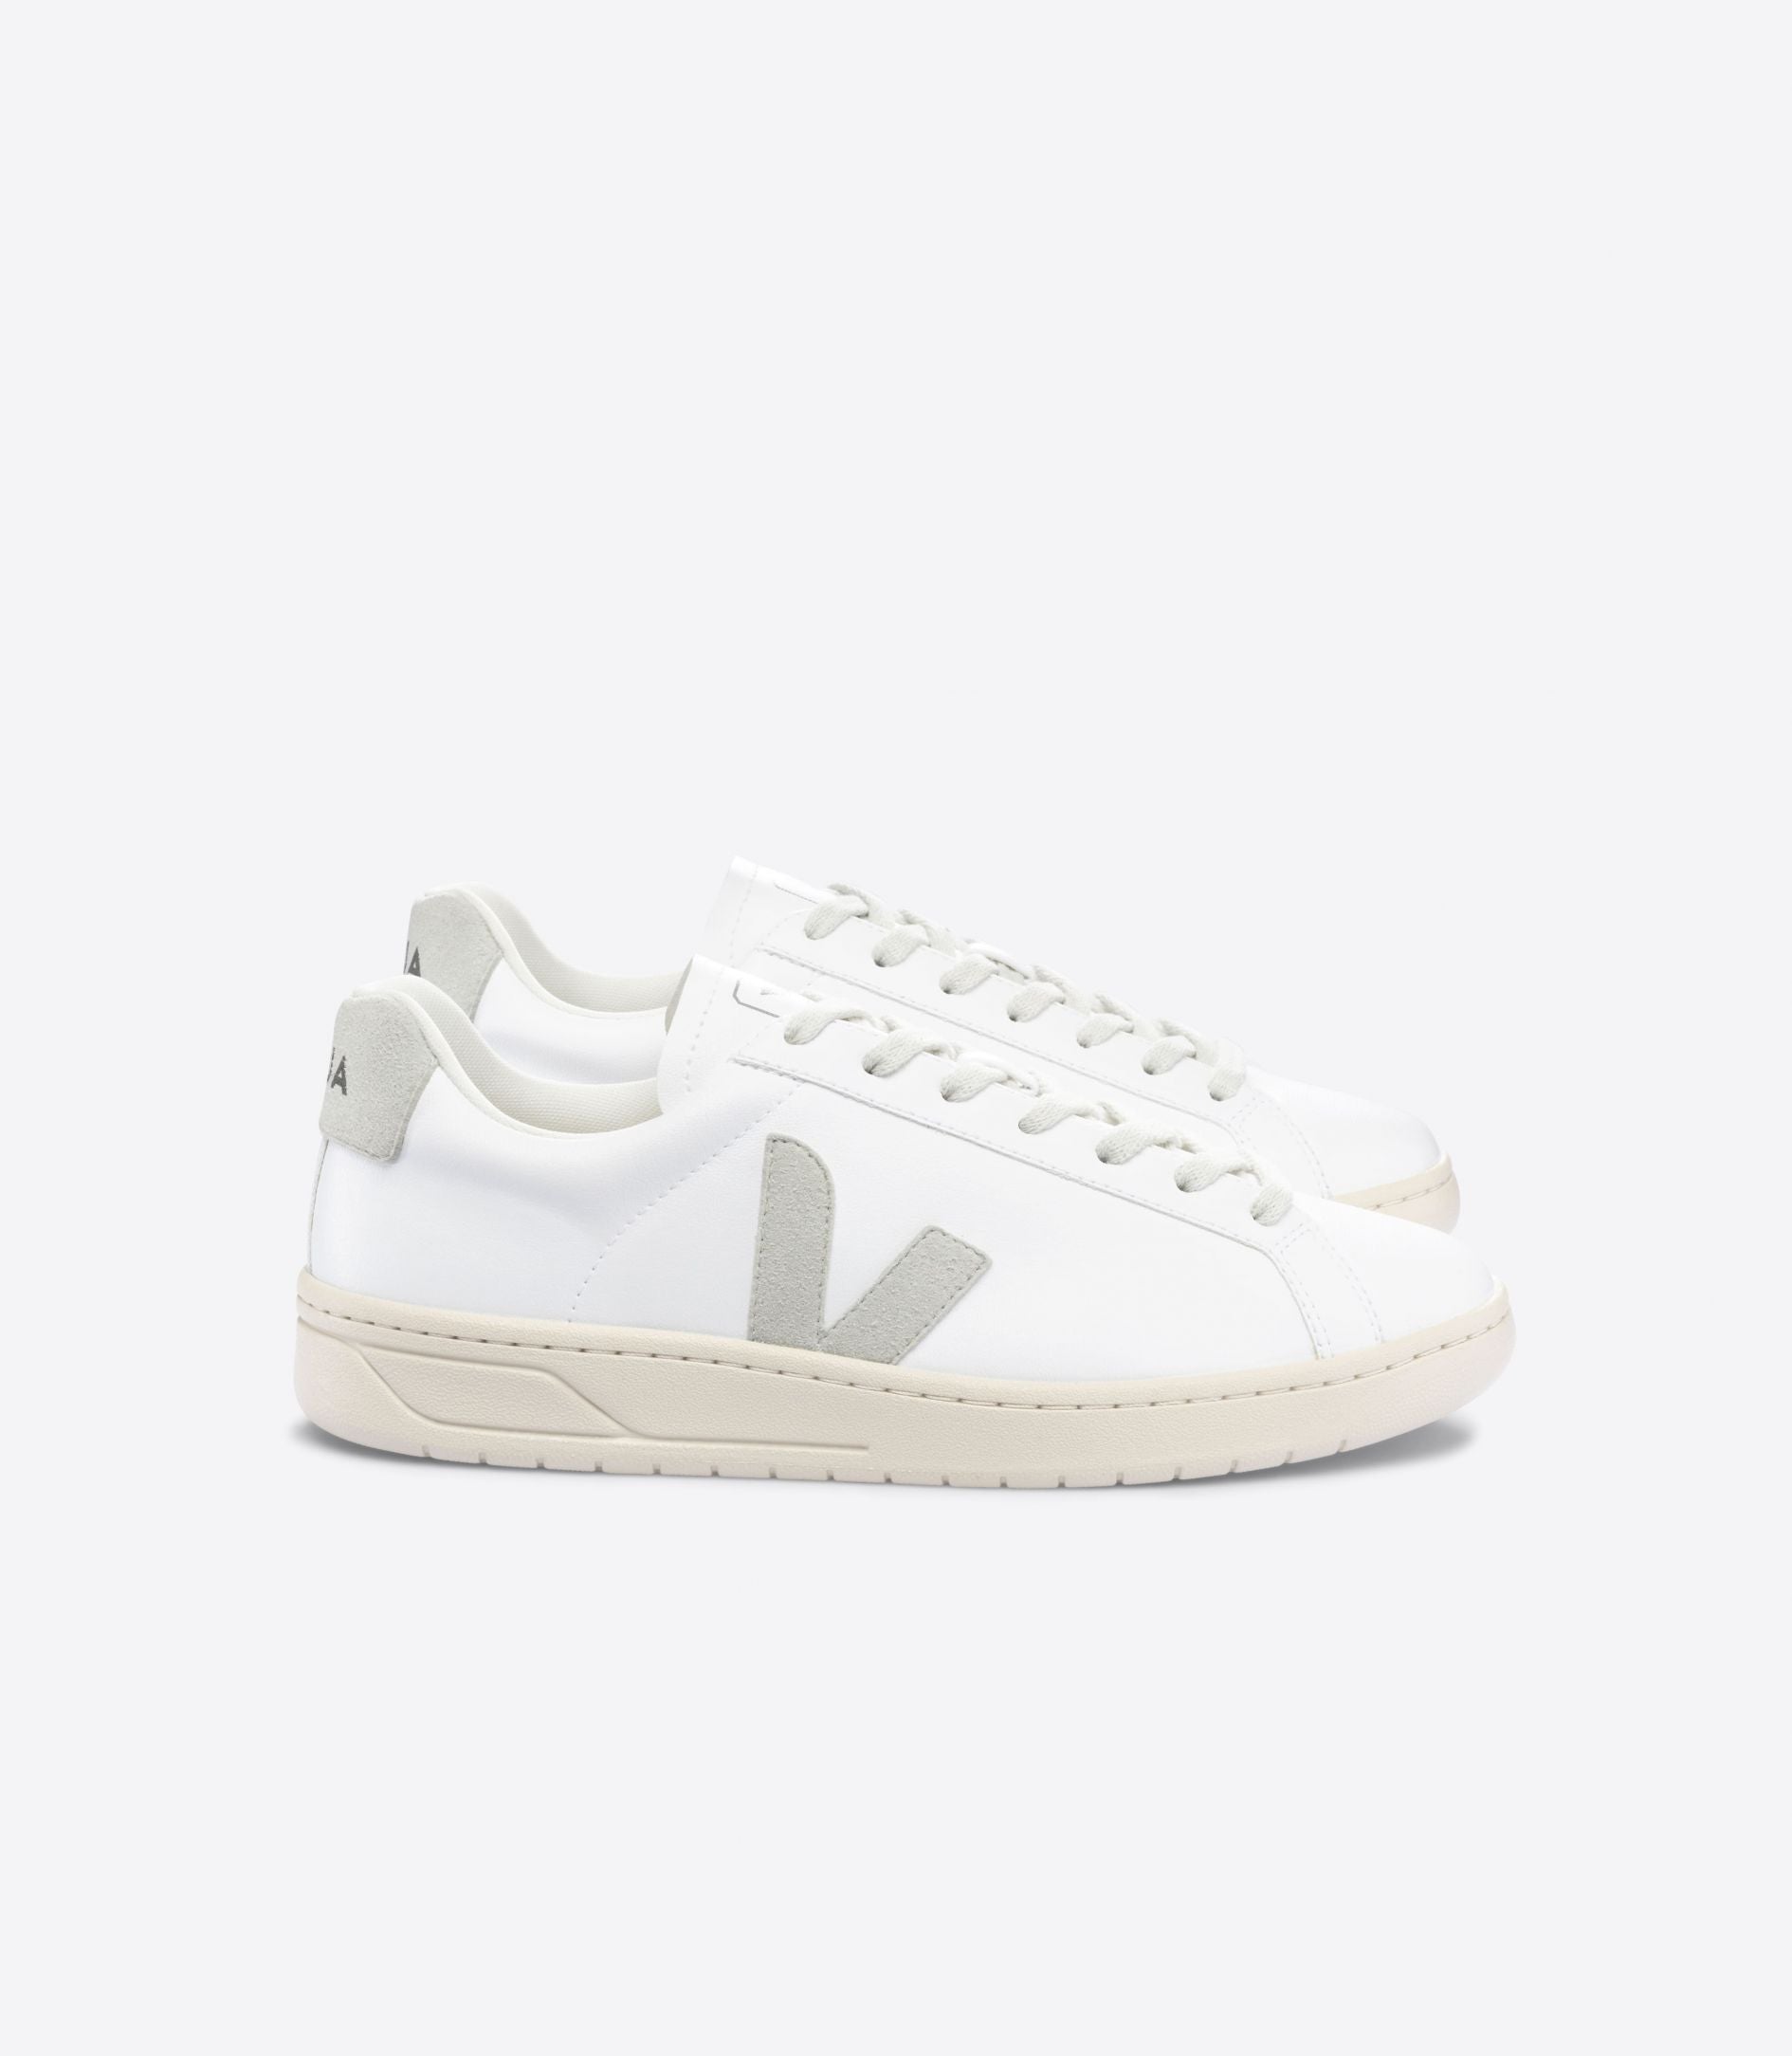 Lateral view of the Women's Urca by VEJA in the color White/Natural